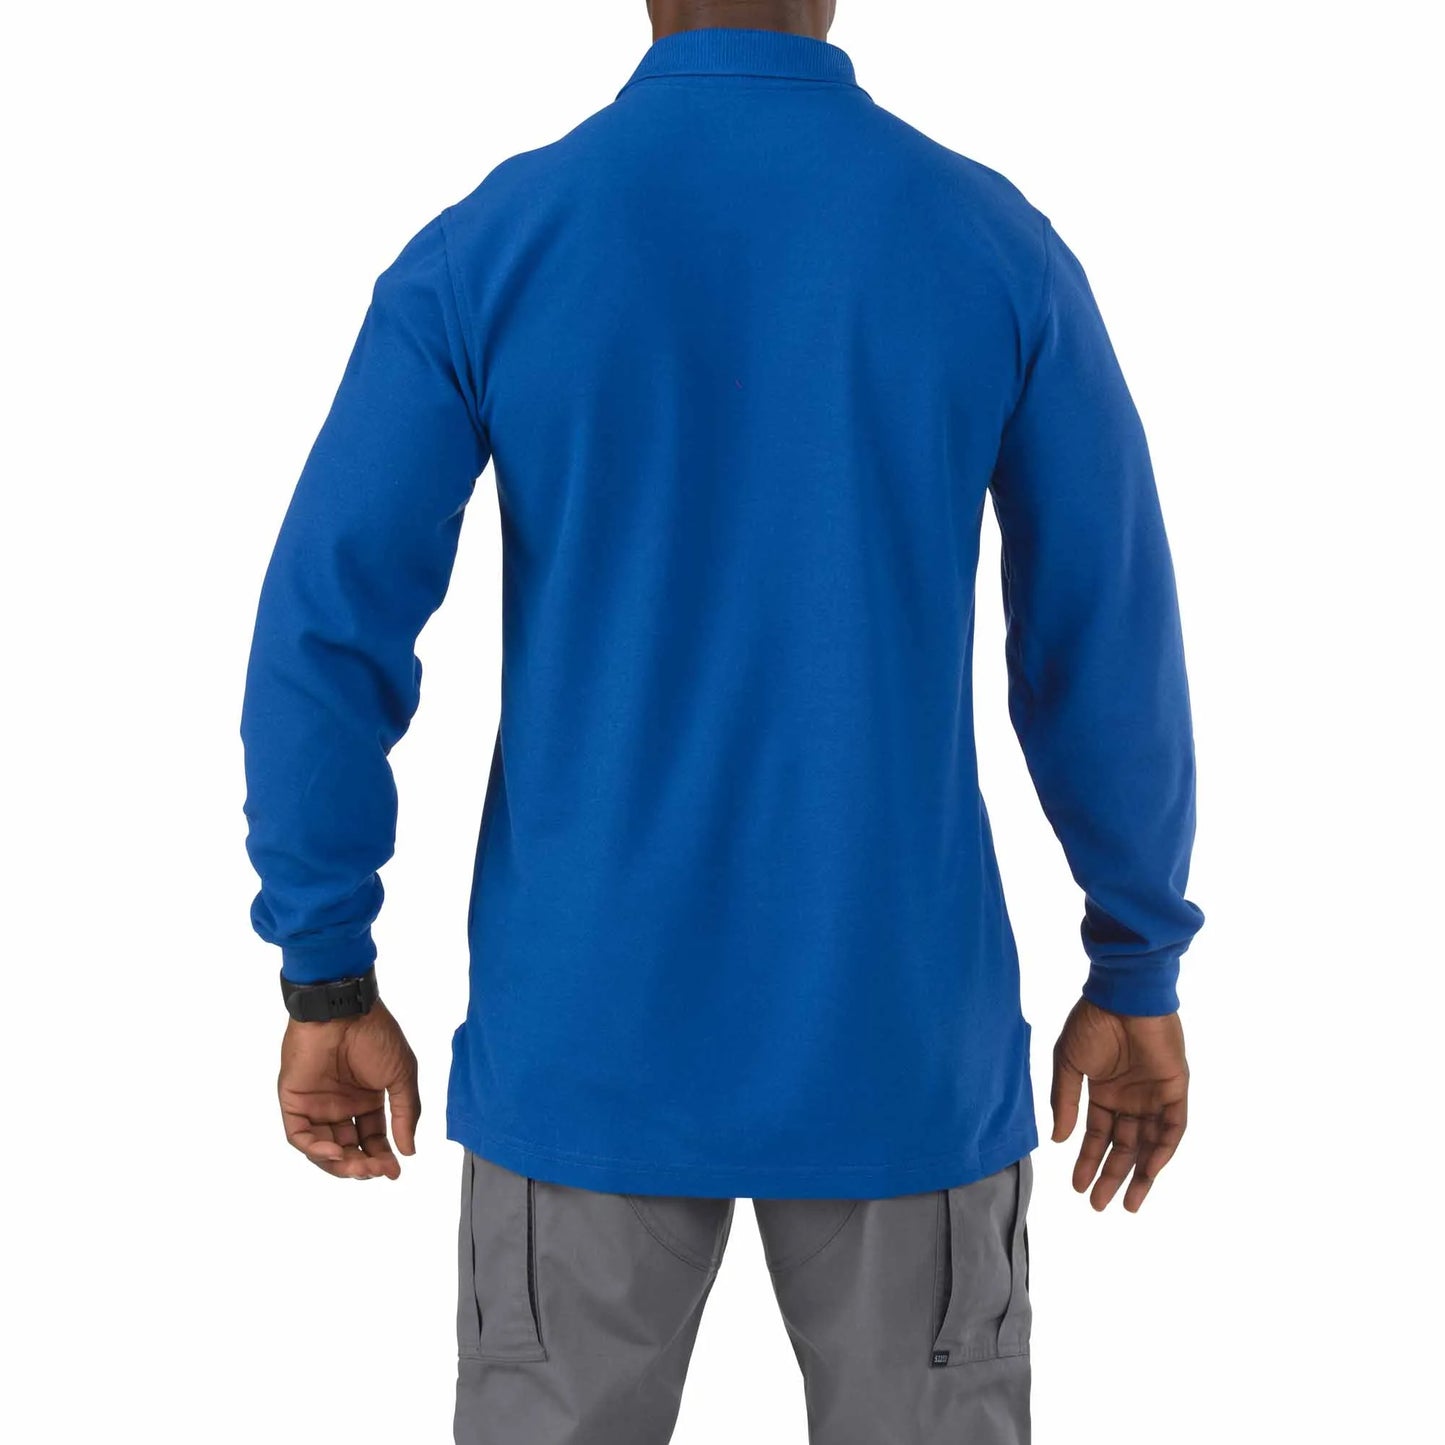 5.11 Tactical Utility Long Sleeve Polo-Tac Essentials